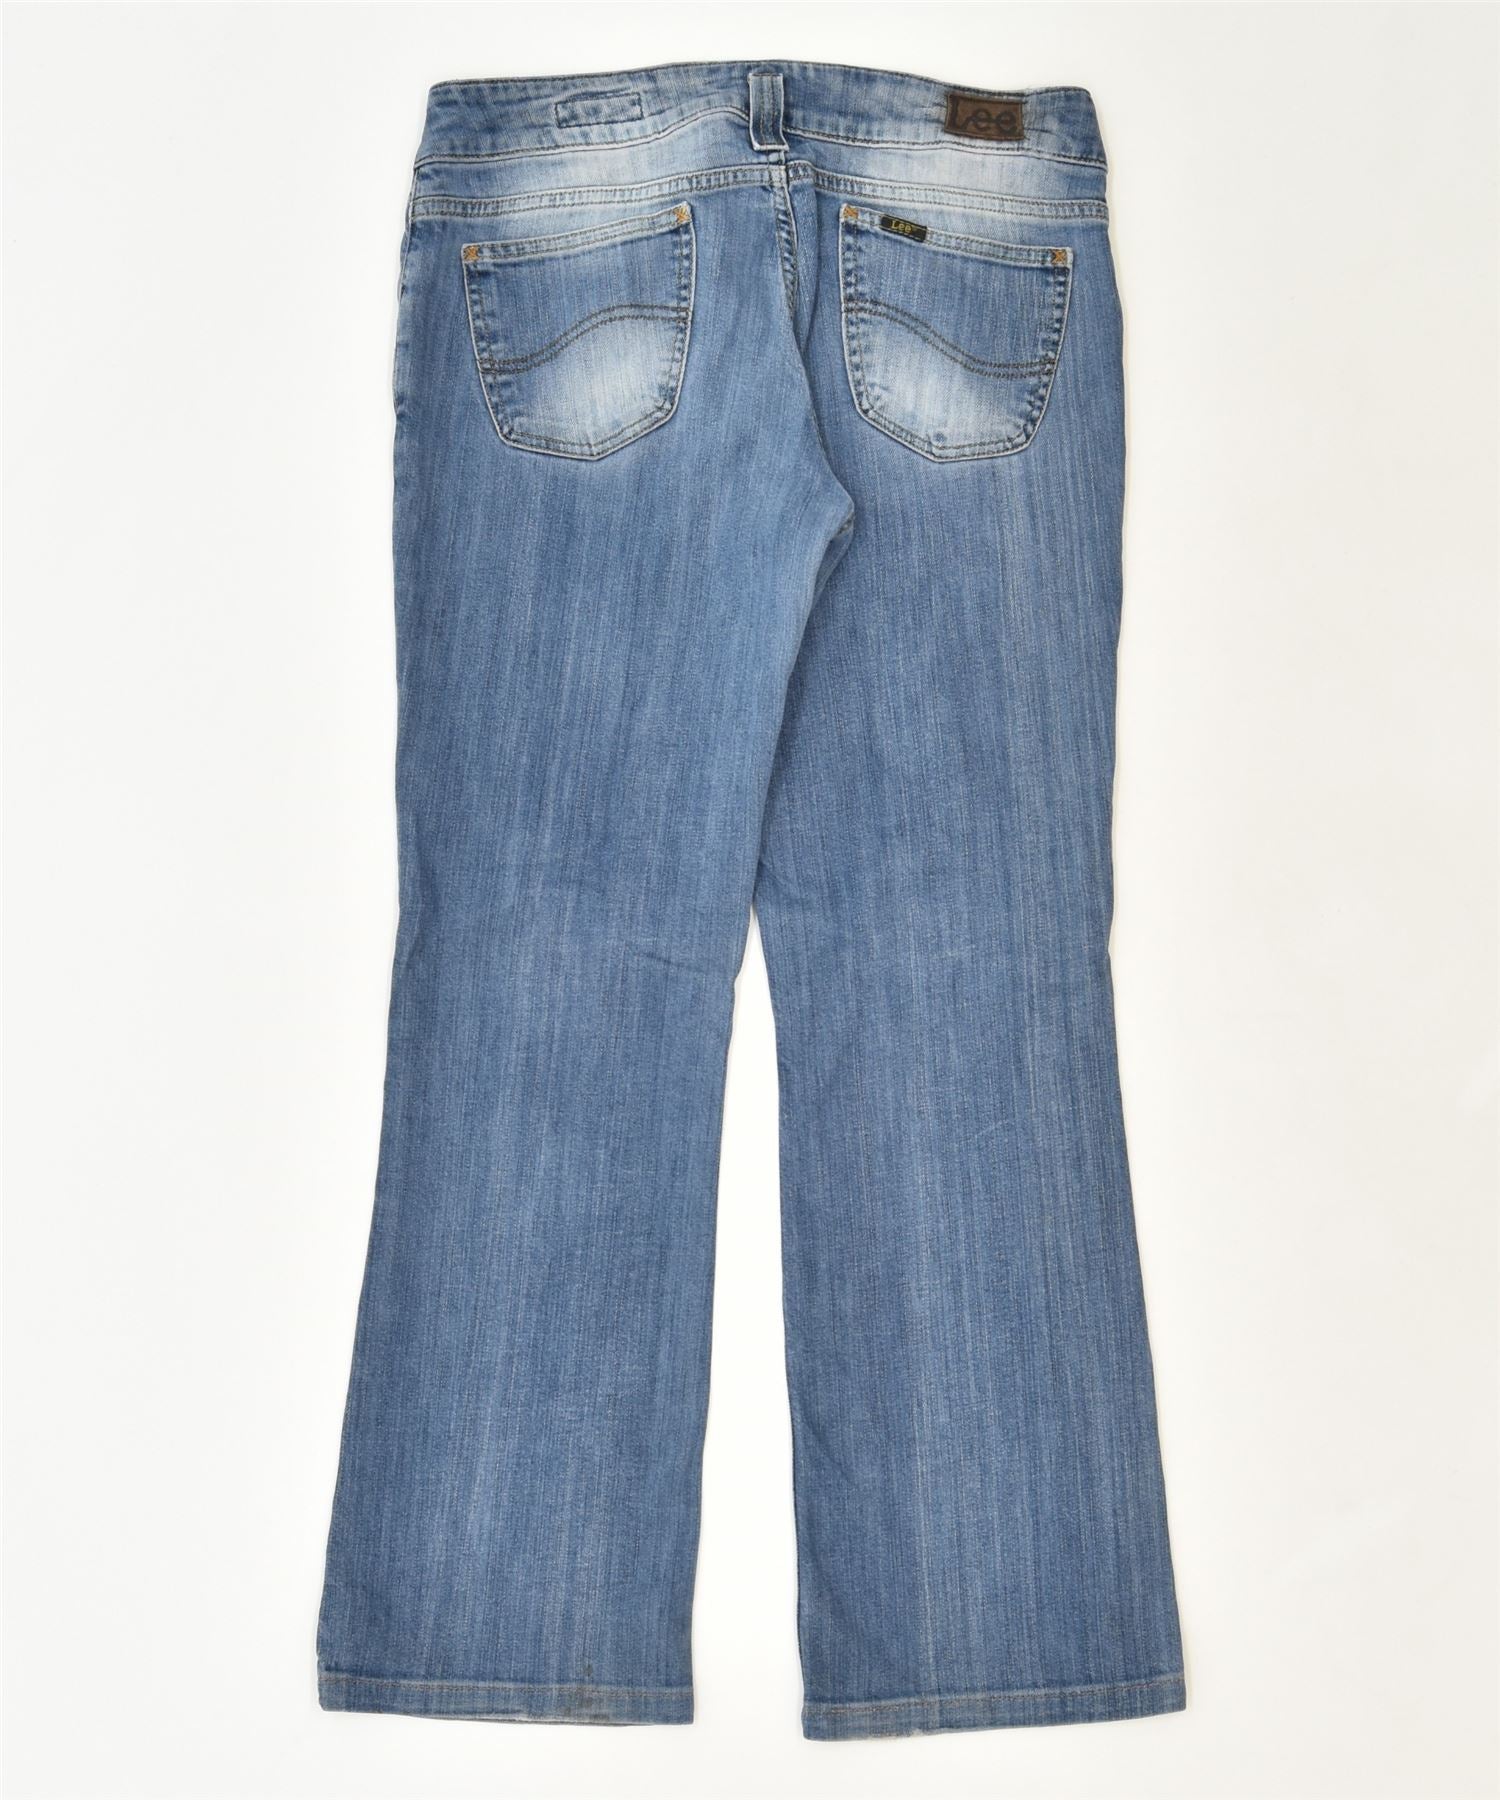 Lee Jeans Wide leg jeans for women online - Buy now at